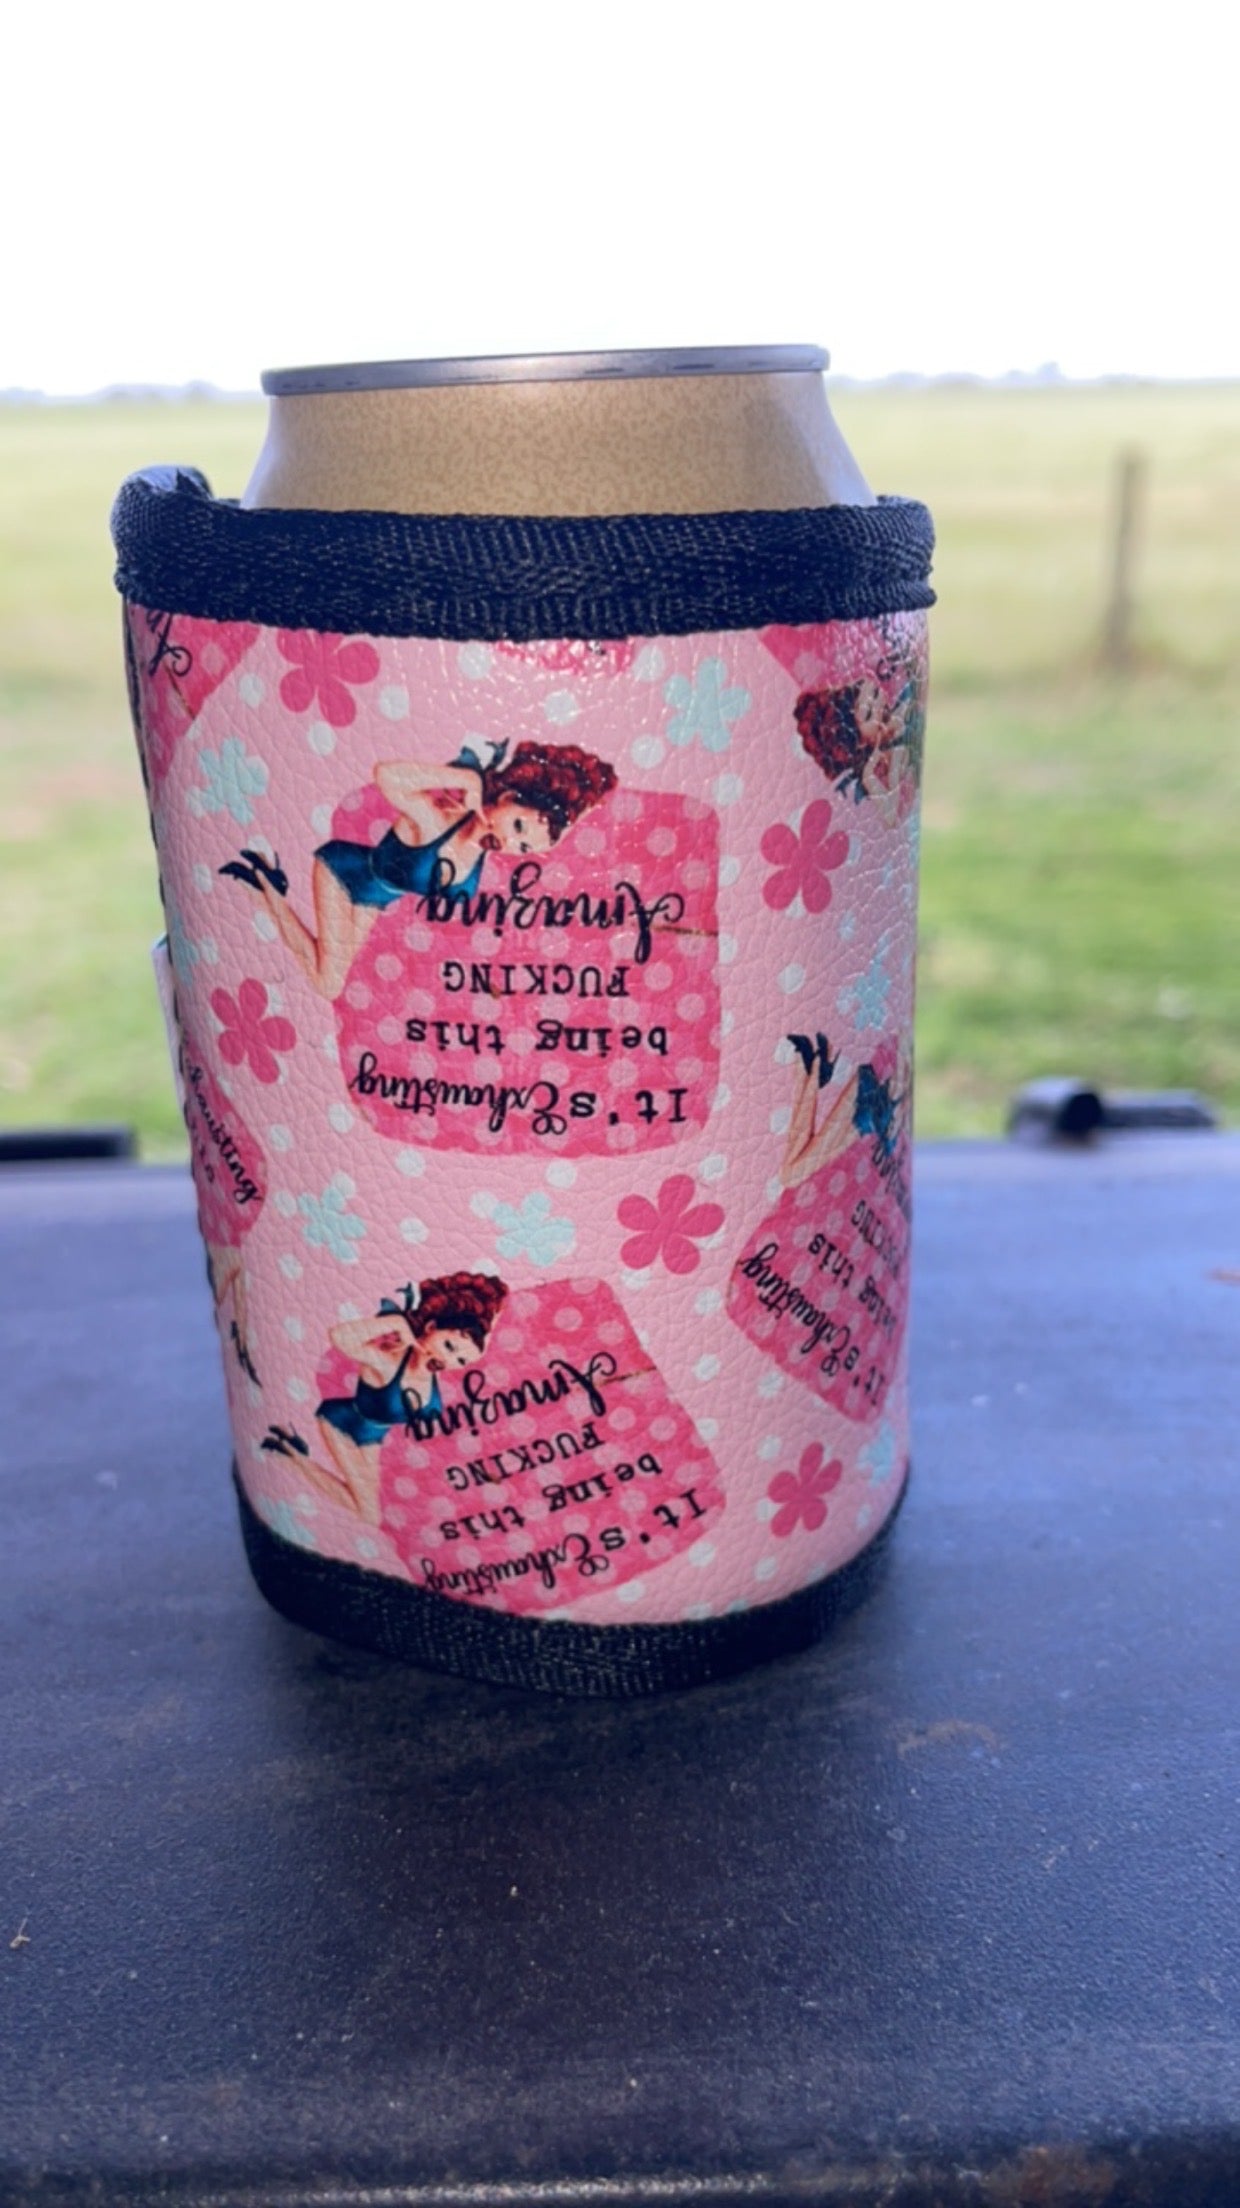 Vinyl Stubby Holder - it’s exhausting being this fucking amazing